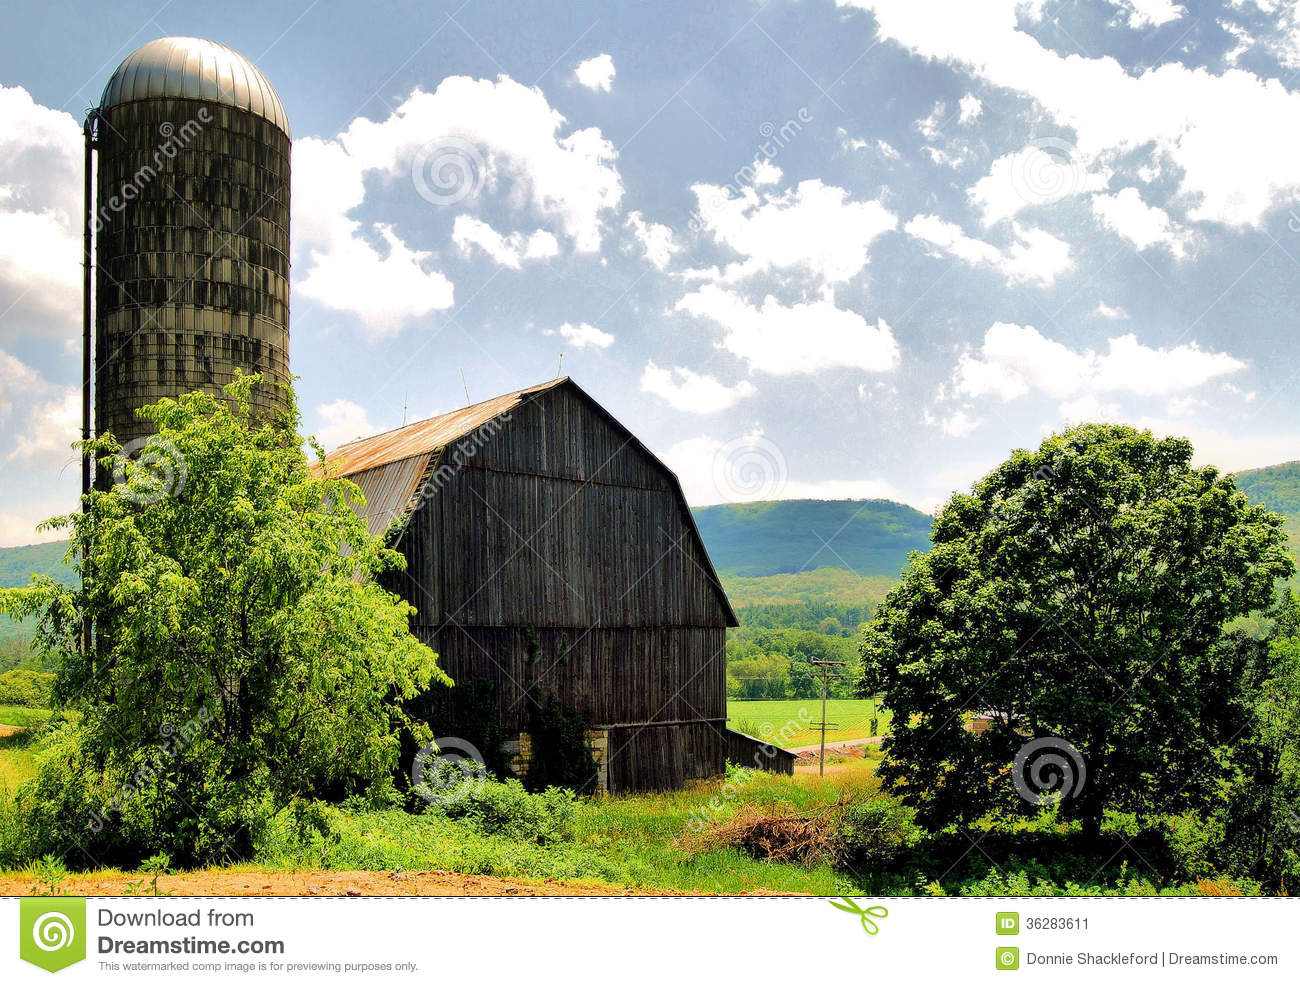 Barn And Silo In The Amish Countryside Of Pennsylvania 